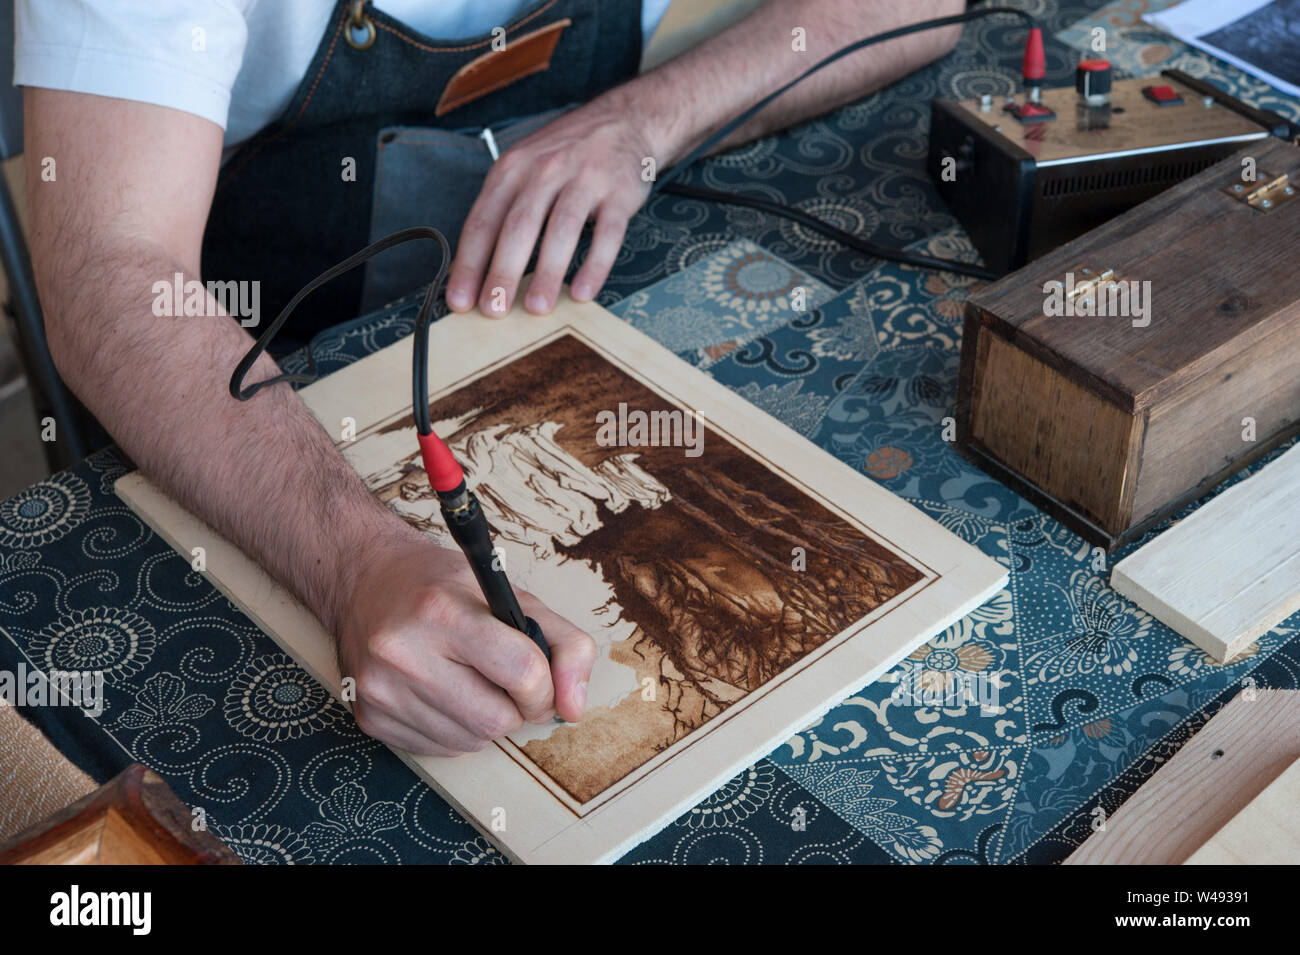 The Pyrography is an engraving technique by means of a heat source, on wood, leather, cork and other materials. Stock Photo